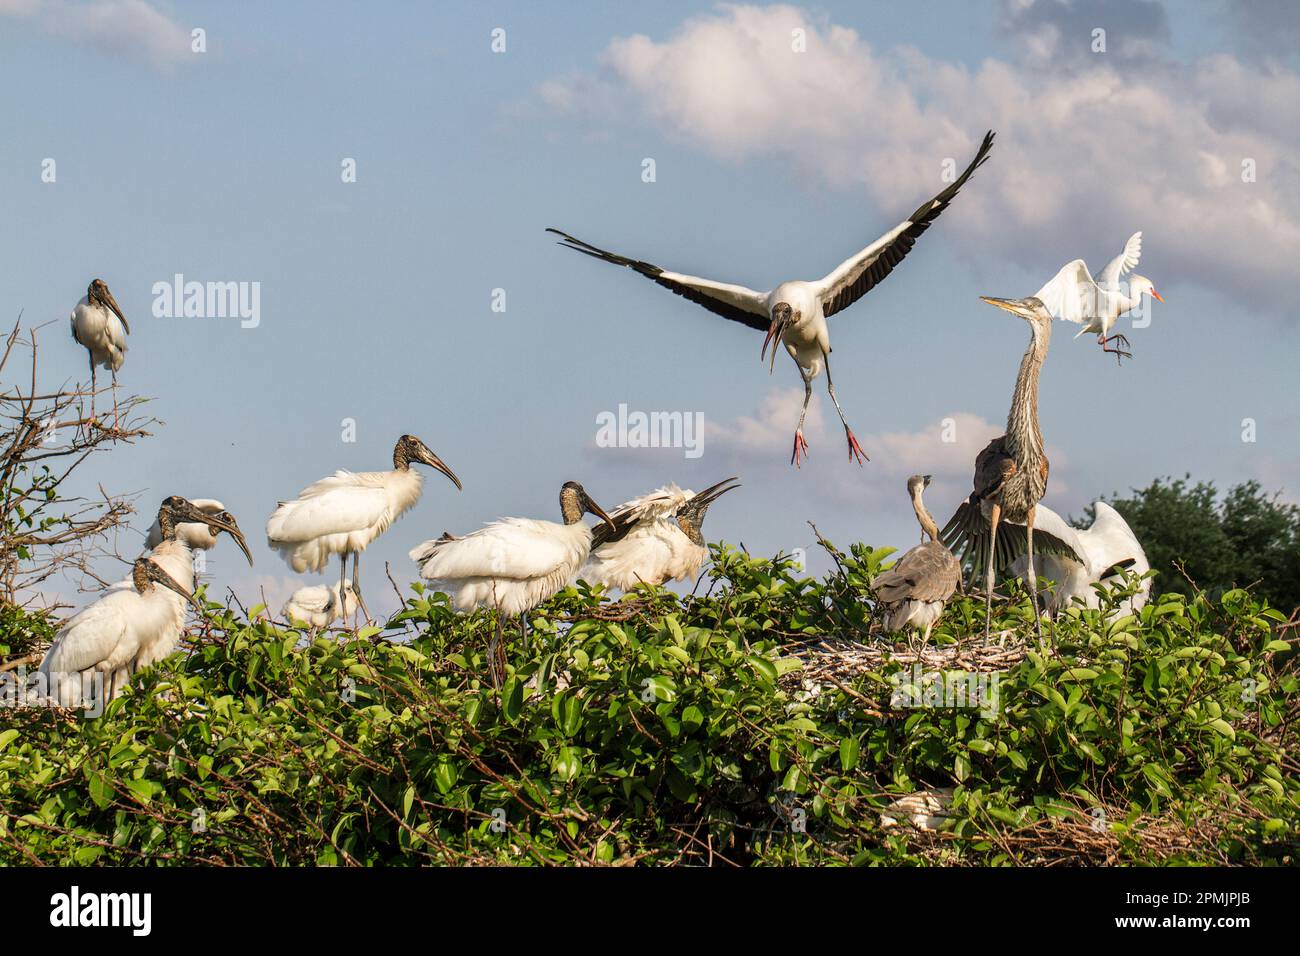 Bird rookery in Florida with multiple species nesting together. Wood storks and Great blue herons make interesting companions. Stock Photo